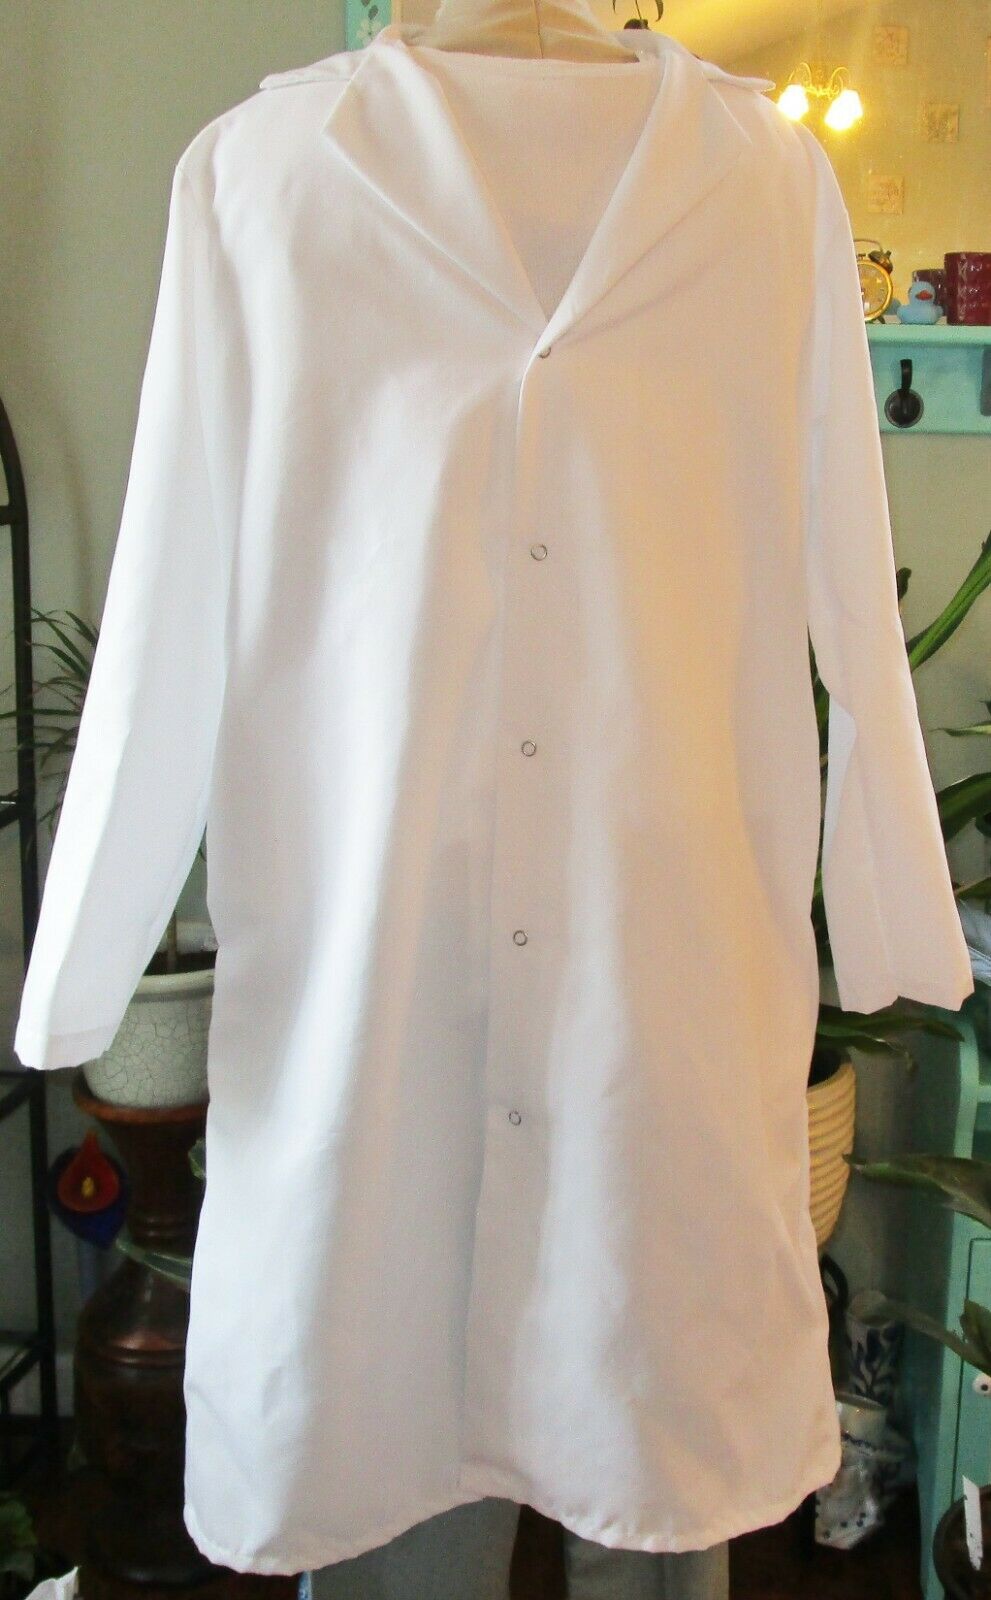 Best Medical Unisex L/s Lab Coat Snap Closure Side Vents White 43" Length Small